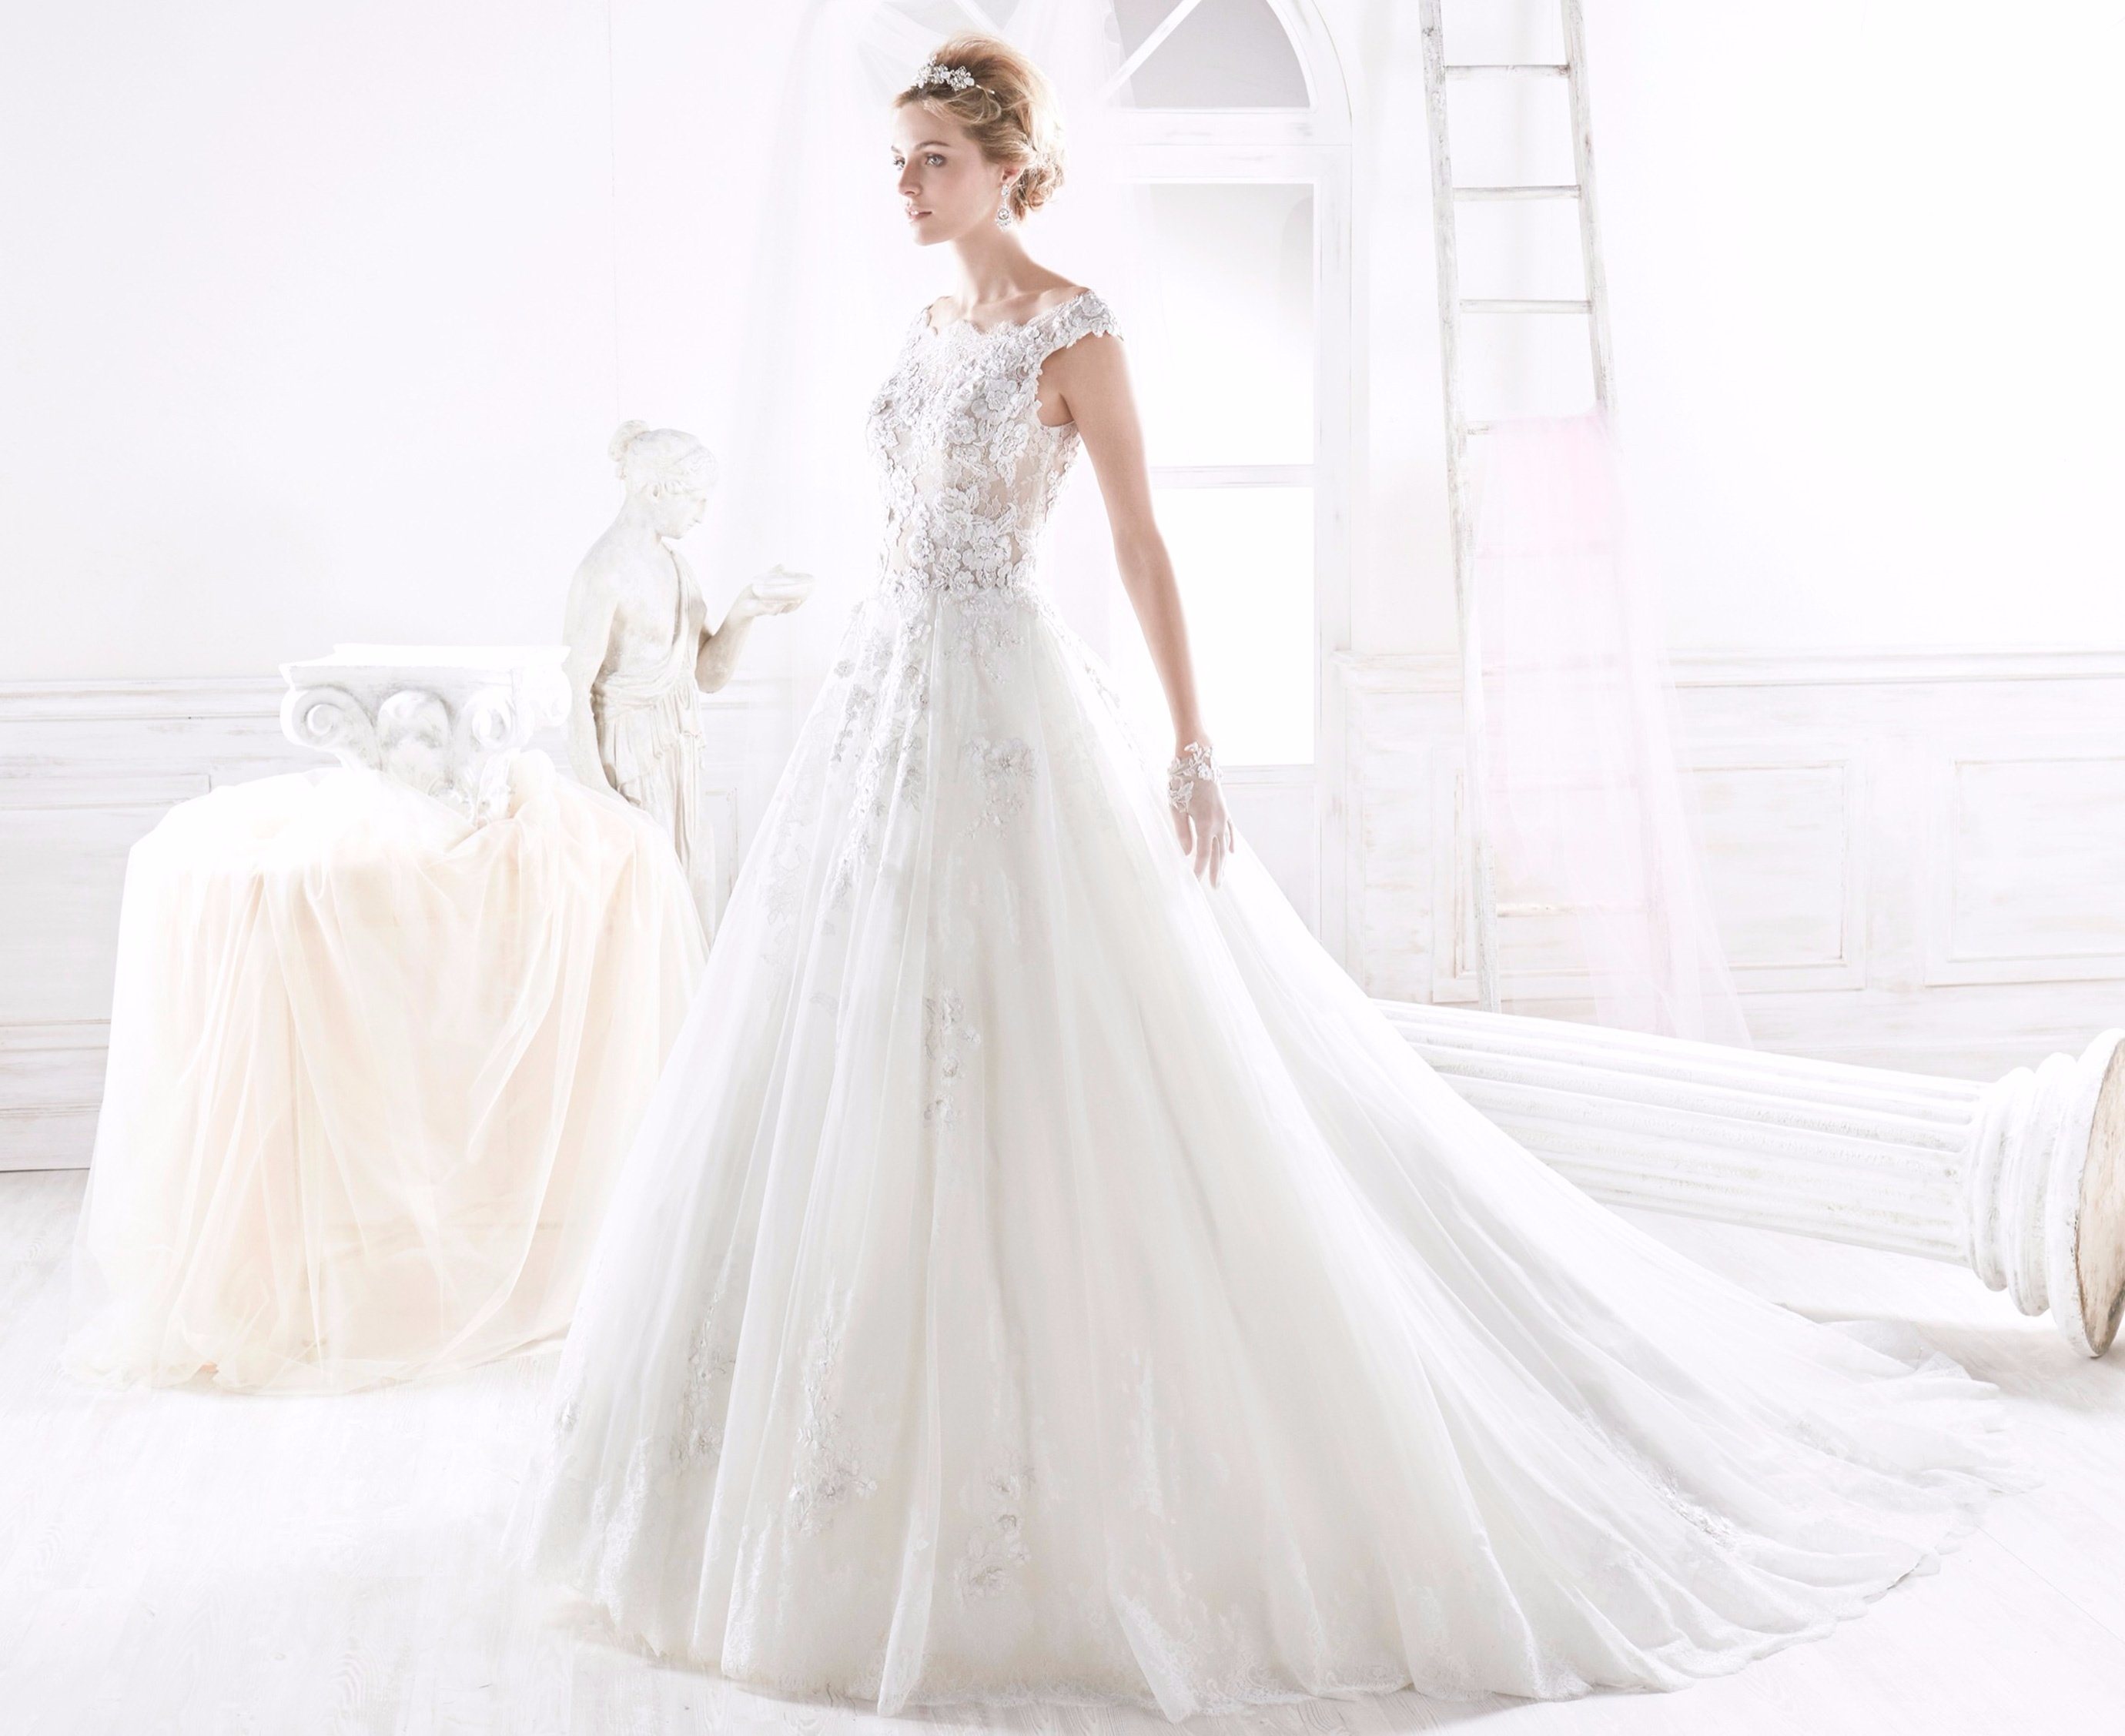 Lace 3D Flower Tulle Ball Bridal Gown